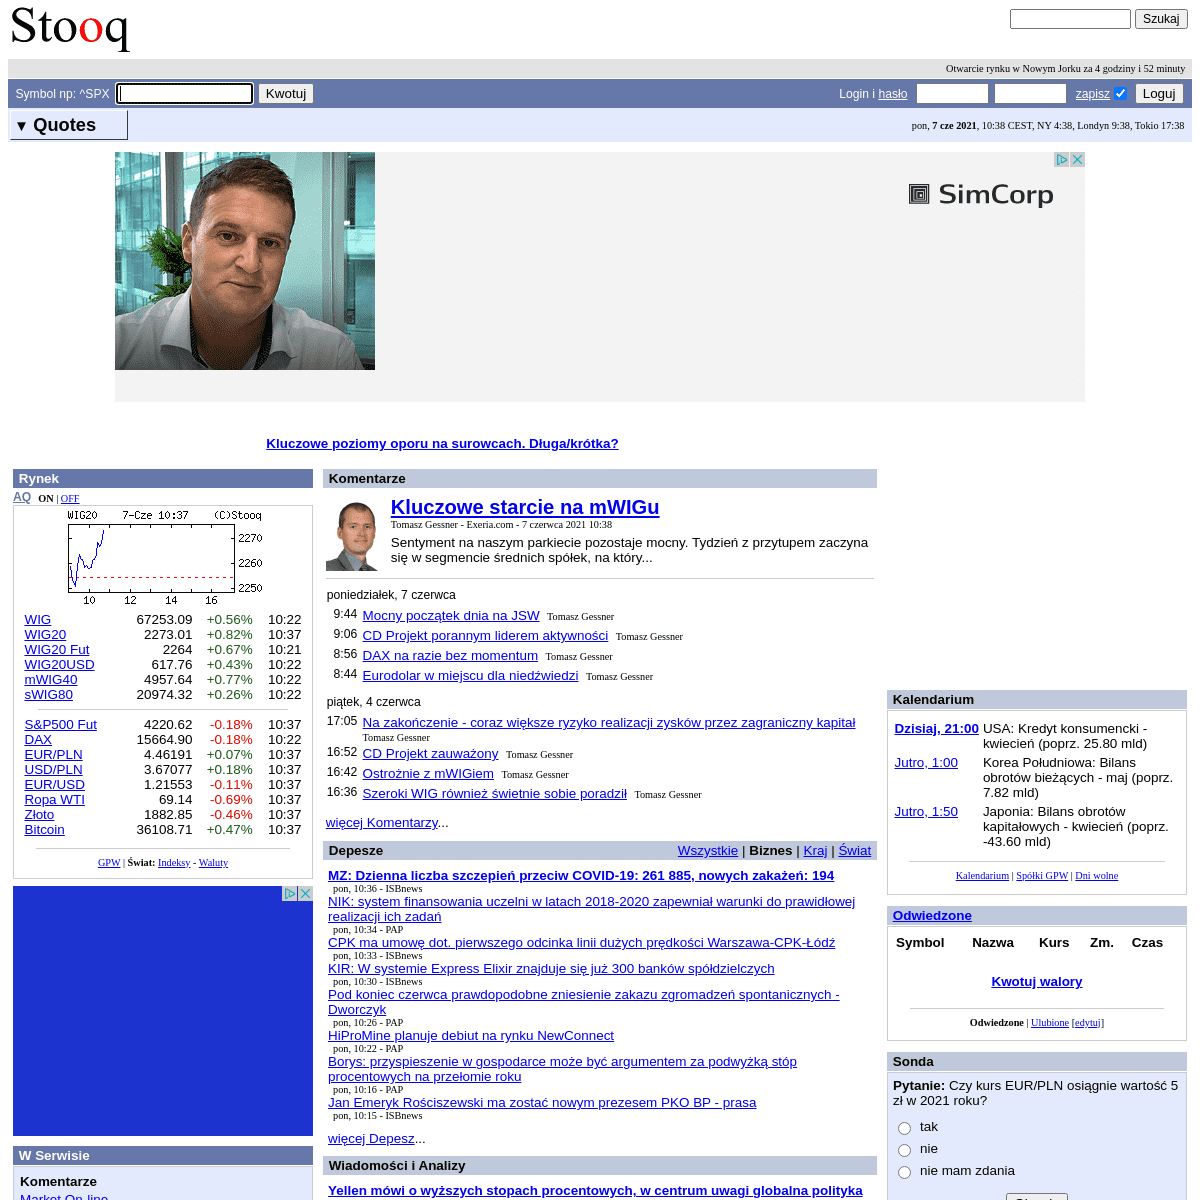 A complete backup of https://stooq.com